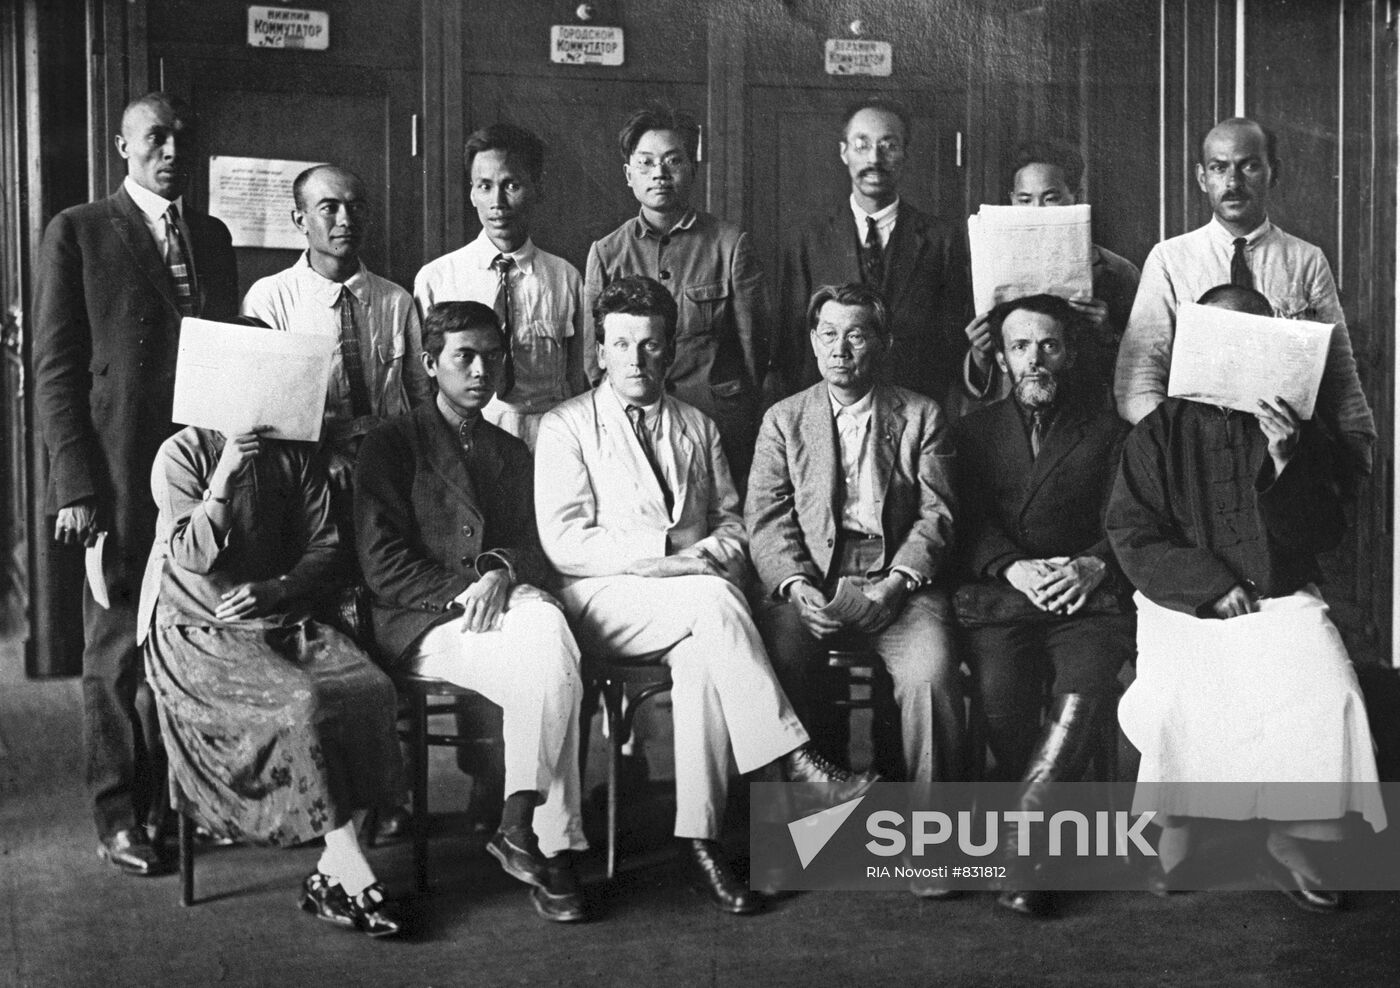 Participants in 5th Congress of Comintern